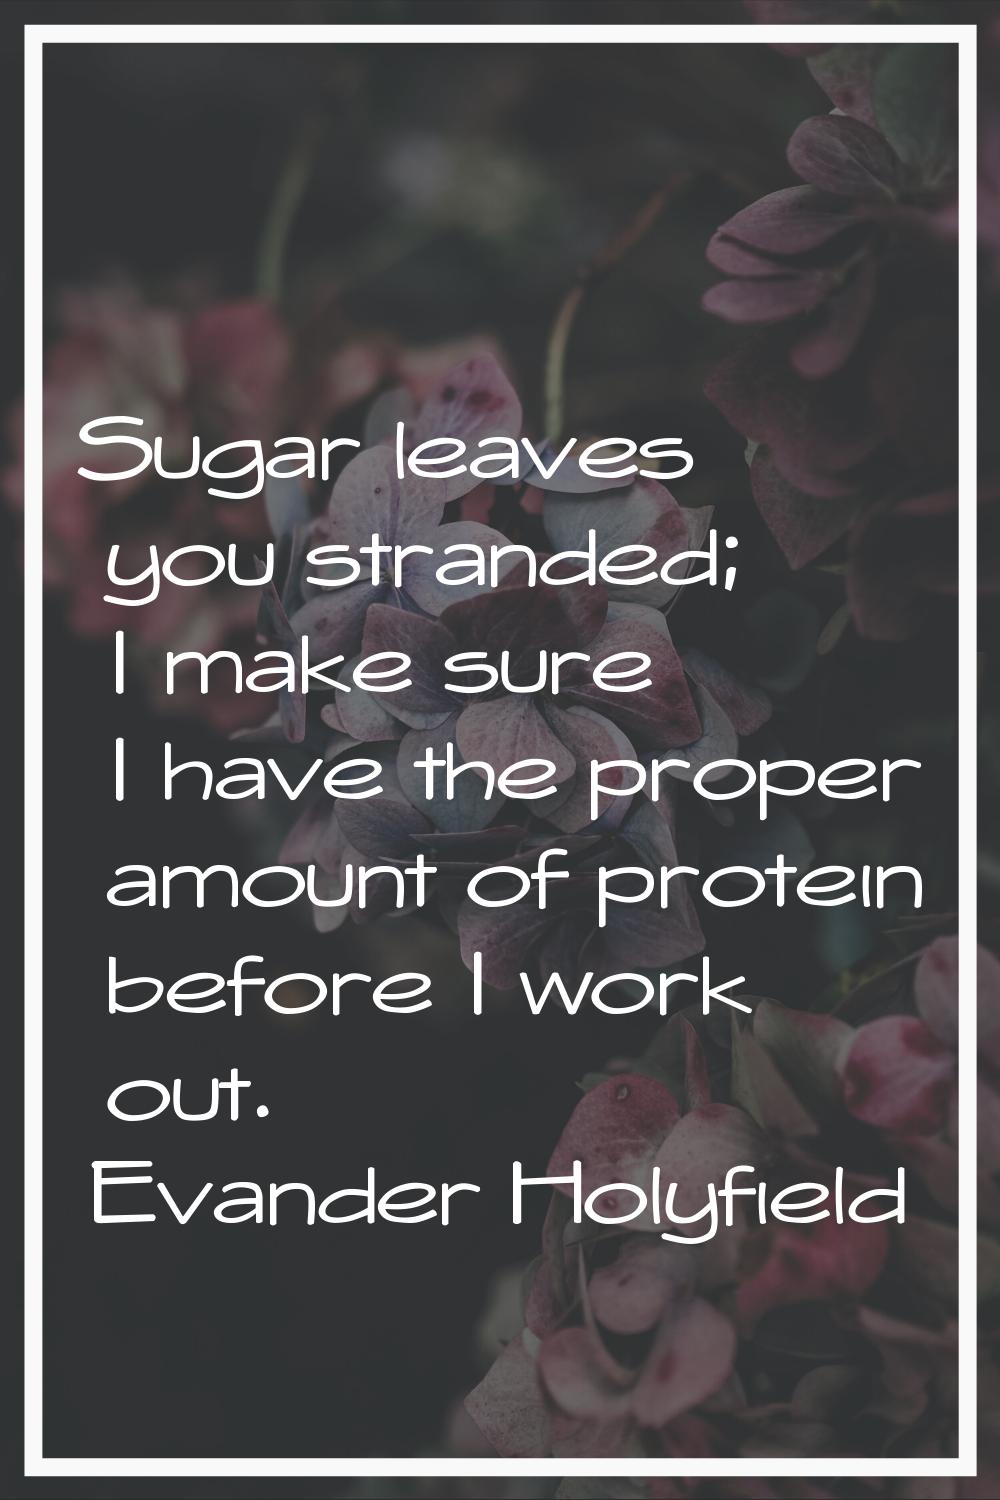 Sugar leaves you stranded; I make sure I have the proper amount of protein before I work out.